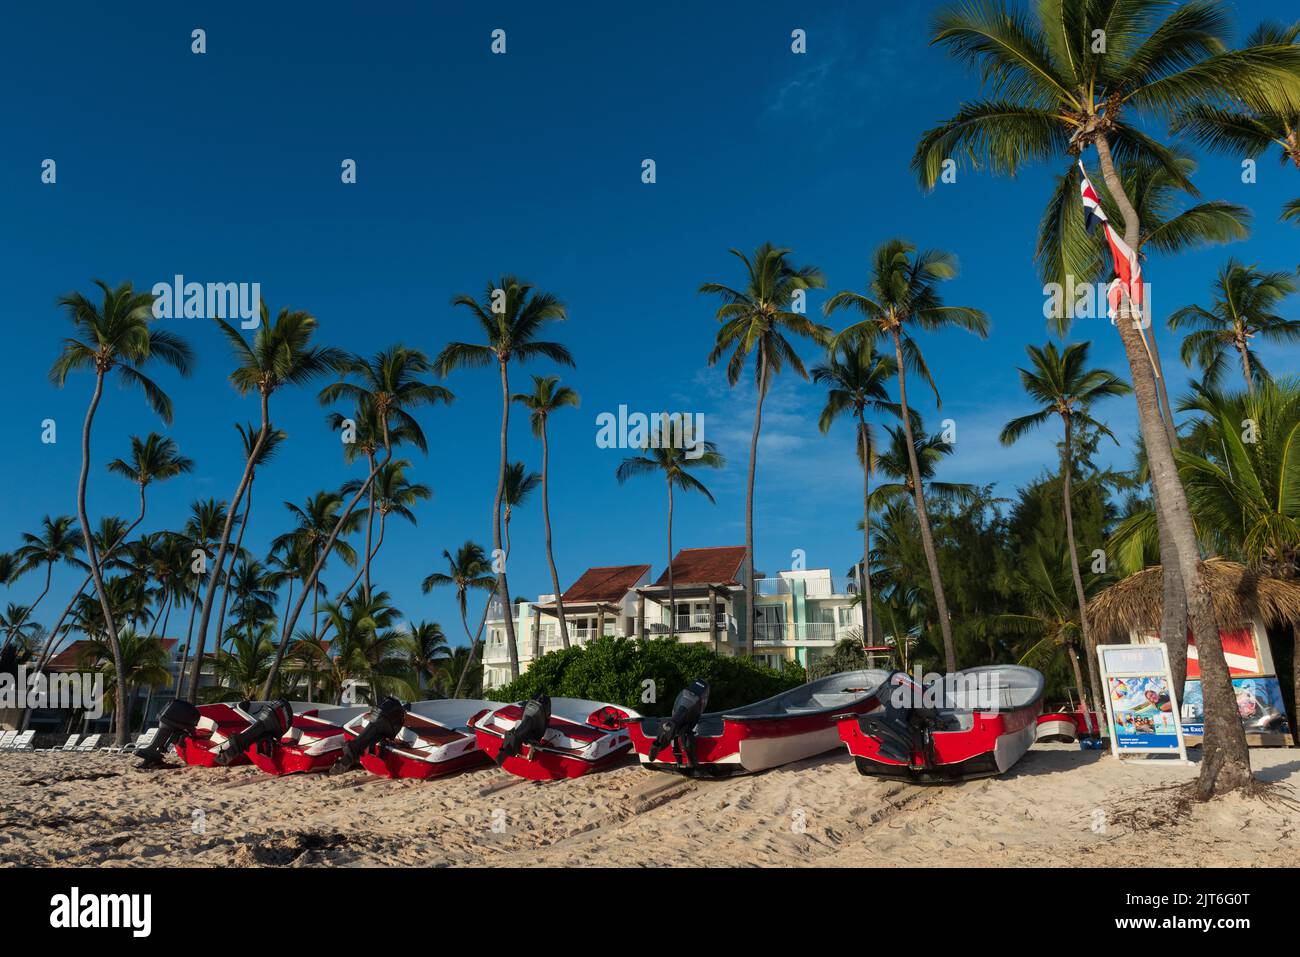 Red and white row boats and palm trees on Playa Bavaro in Punta Cana in the Dominican Republic. Stock Photo